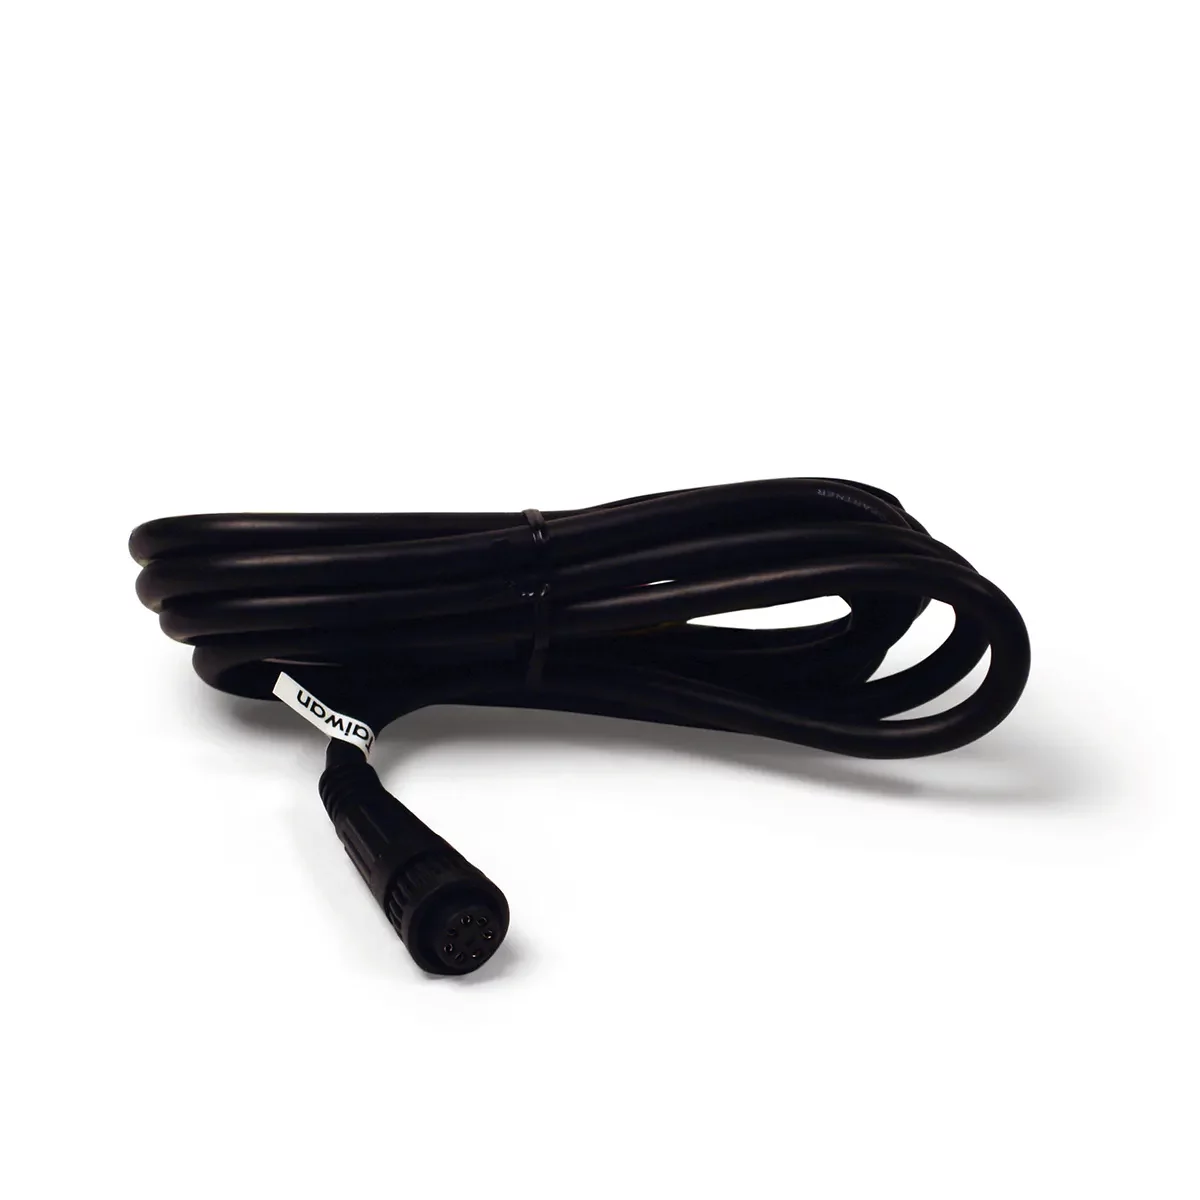 Garmin power cable for GMS 10